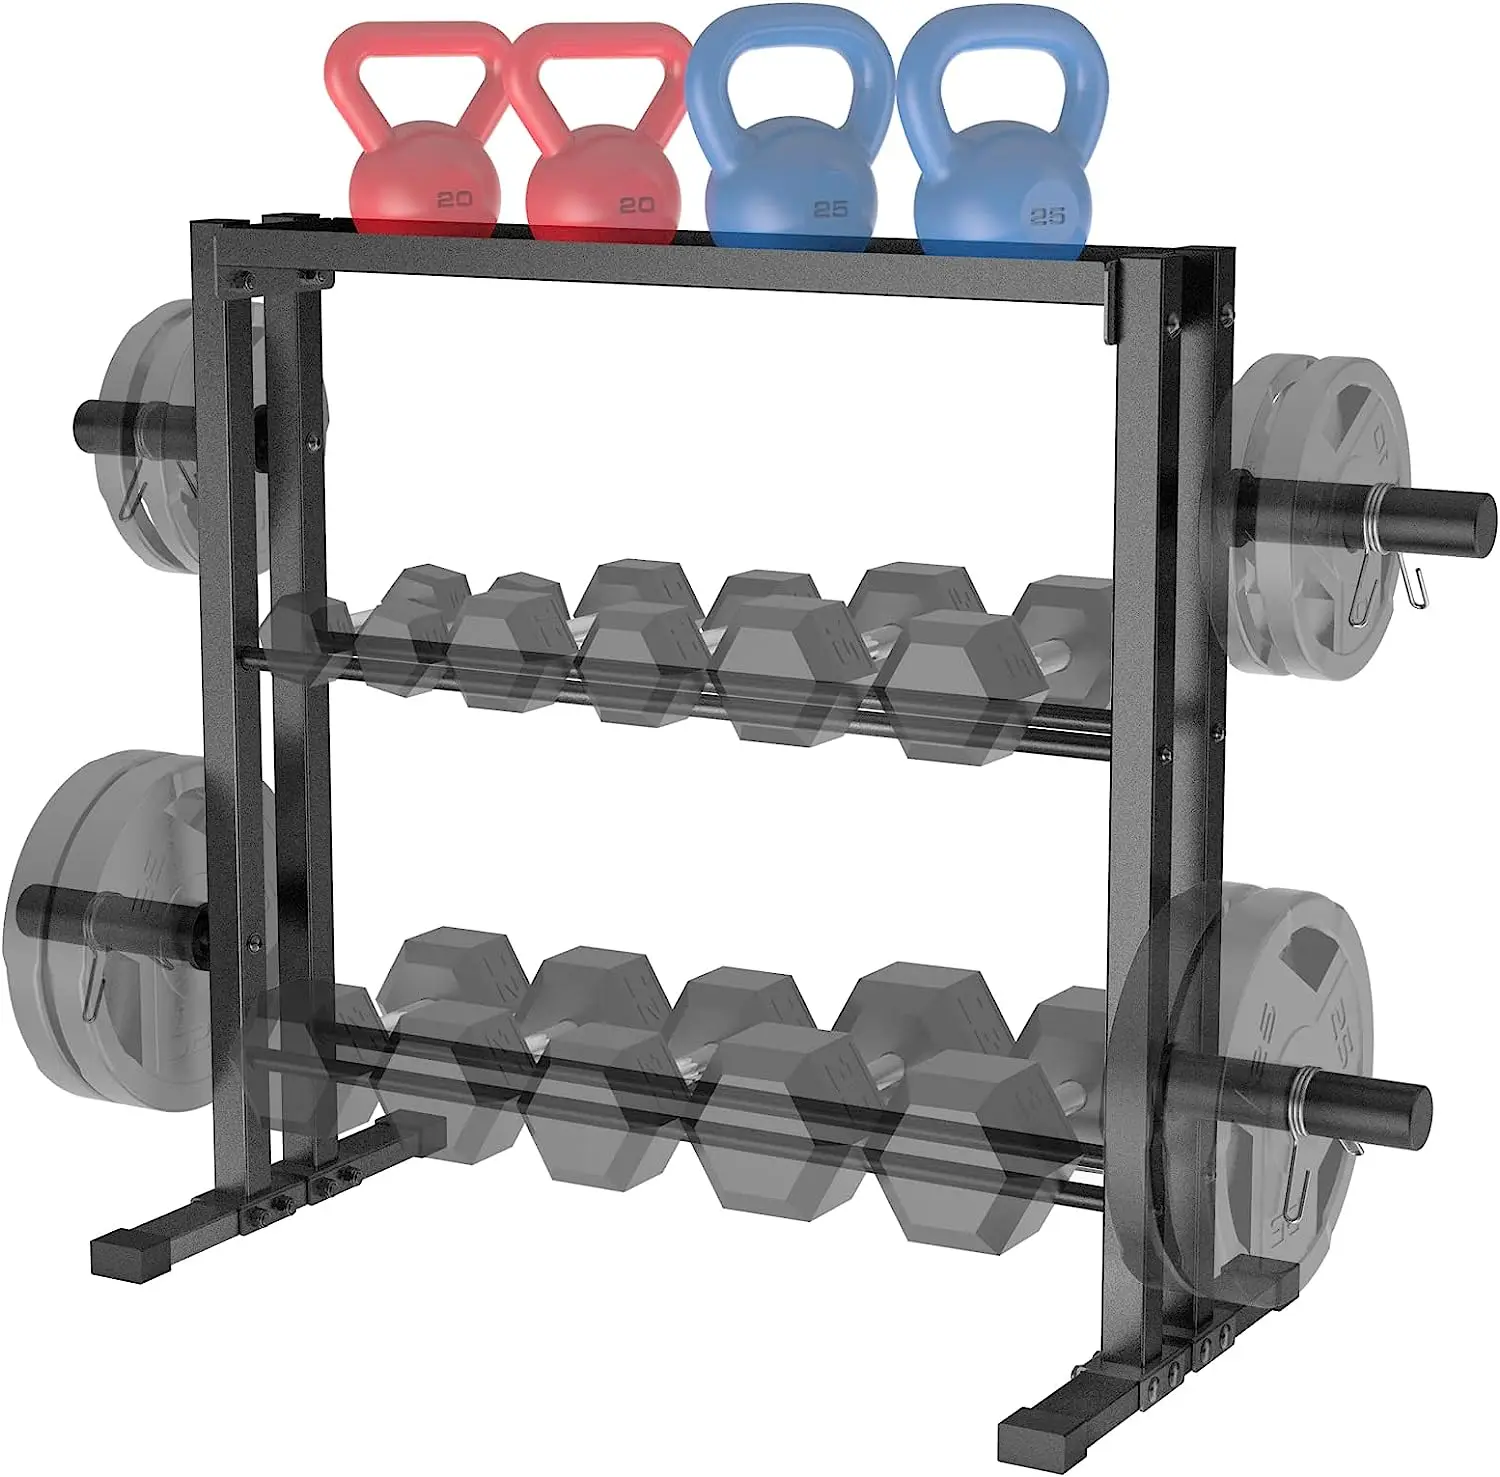 

, 3 Tier Weights Storage for Dumbbells, Weight Plates, and Kettlebells (1100 Pounds Weight Capacity, 2022 Version)